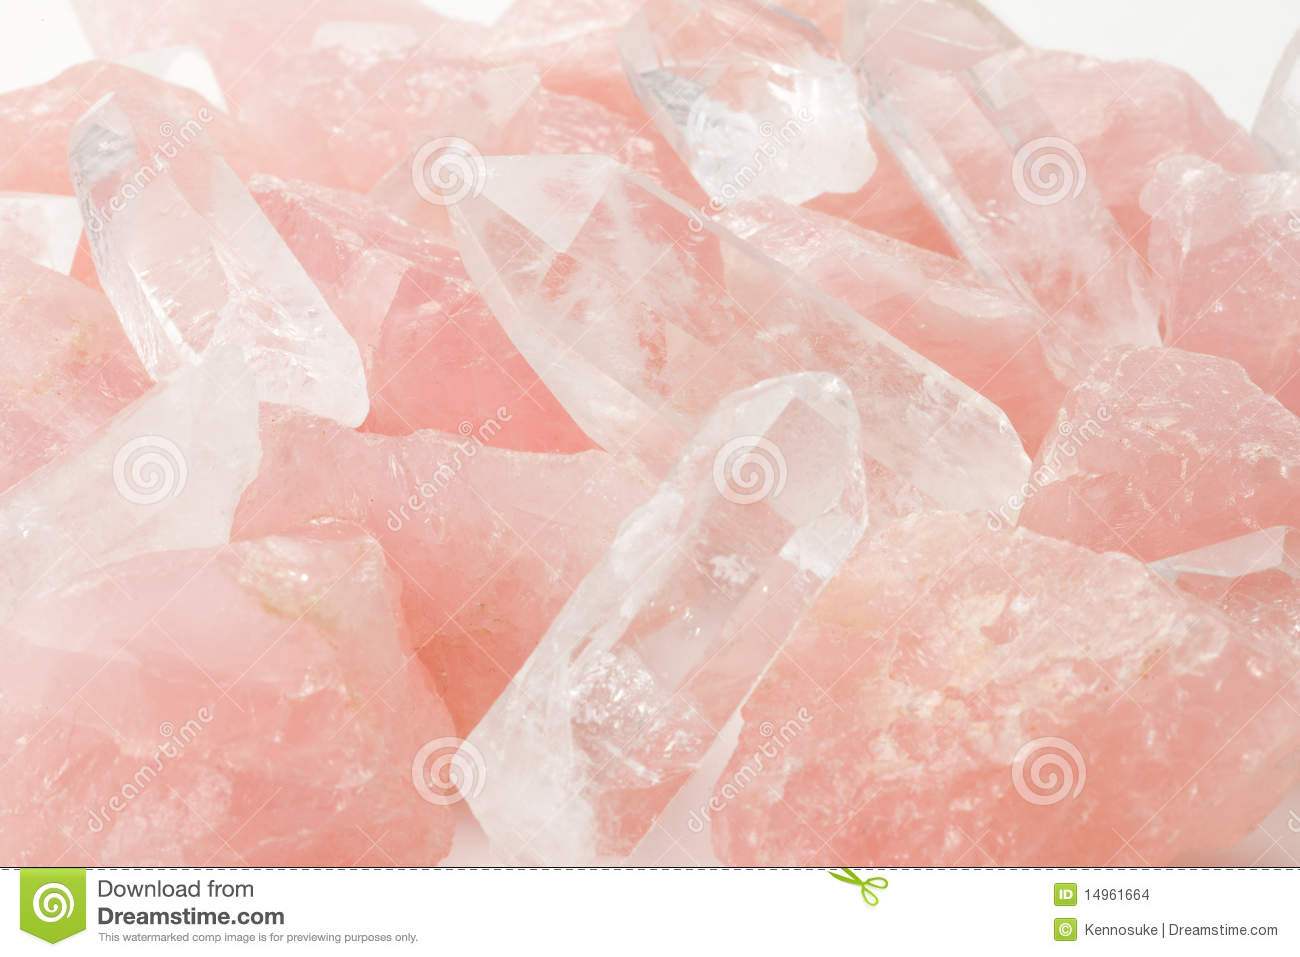 Rose Quartz And Crystal Stock Images   Image  14961664